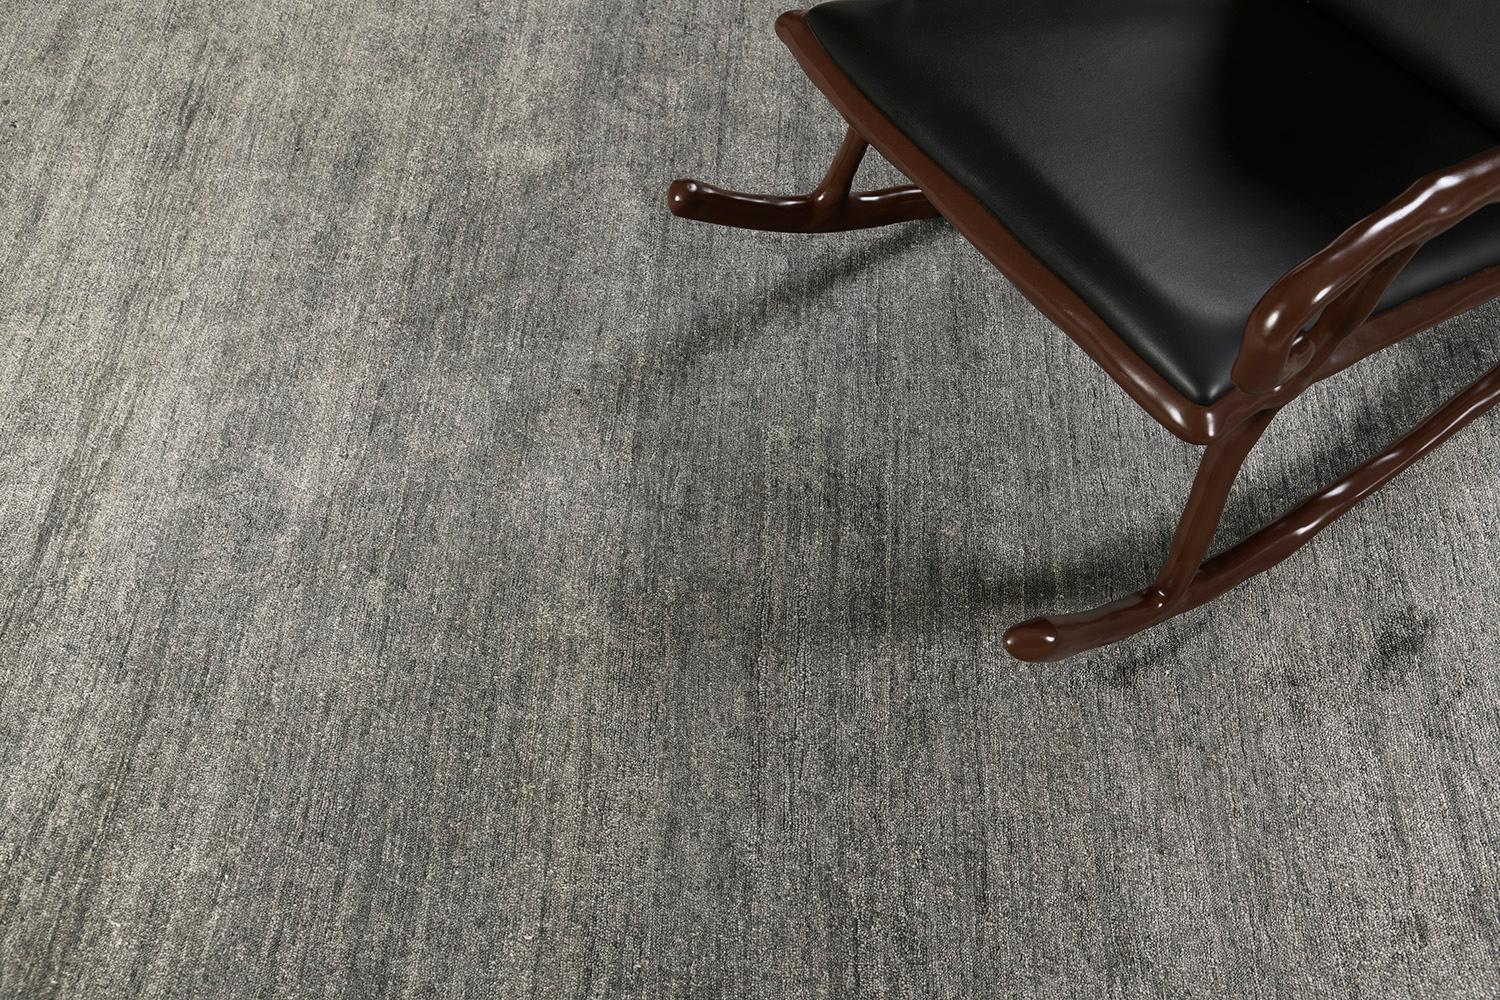 Dara' is the most sought-after rug in the Elan Collection in the mesmerizing shade of neutral grayish brown. Its simplicity does not take away from the rug's luxurious quality and beautiful sheen made of bamboo silk. Dara is a fabulous rug for any